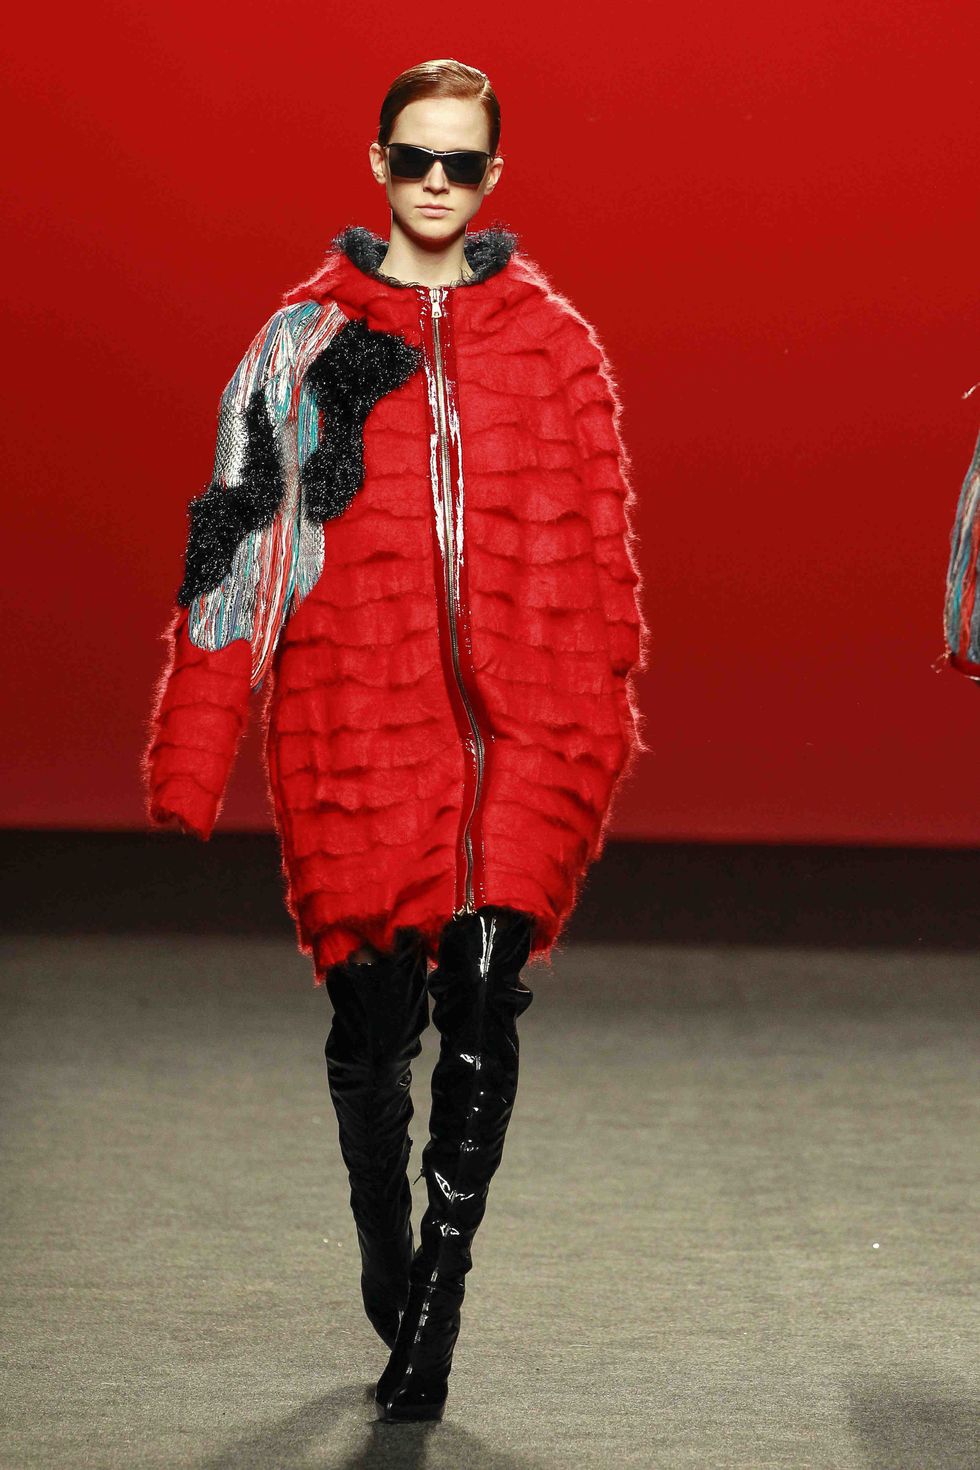 Sunglasses, Textile, Fashion show, Red, Outerwear, Winter, Fashion model, Style, Runway, Flag, 